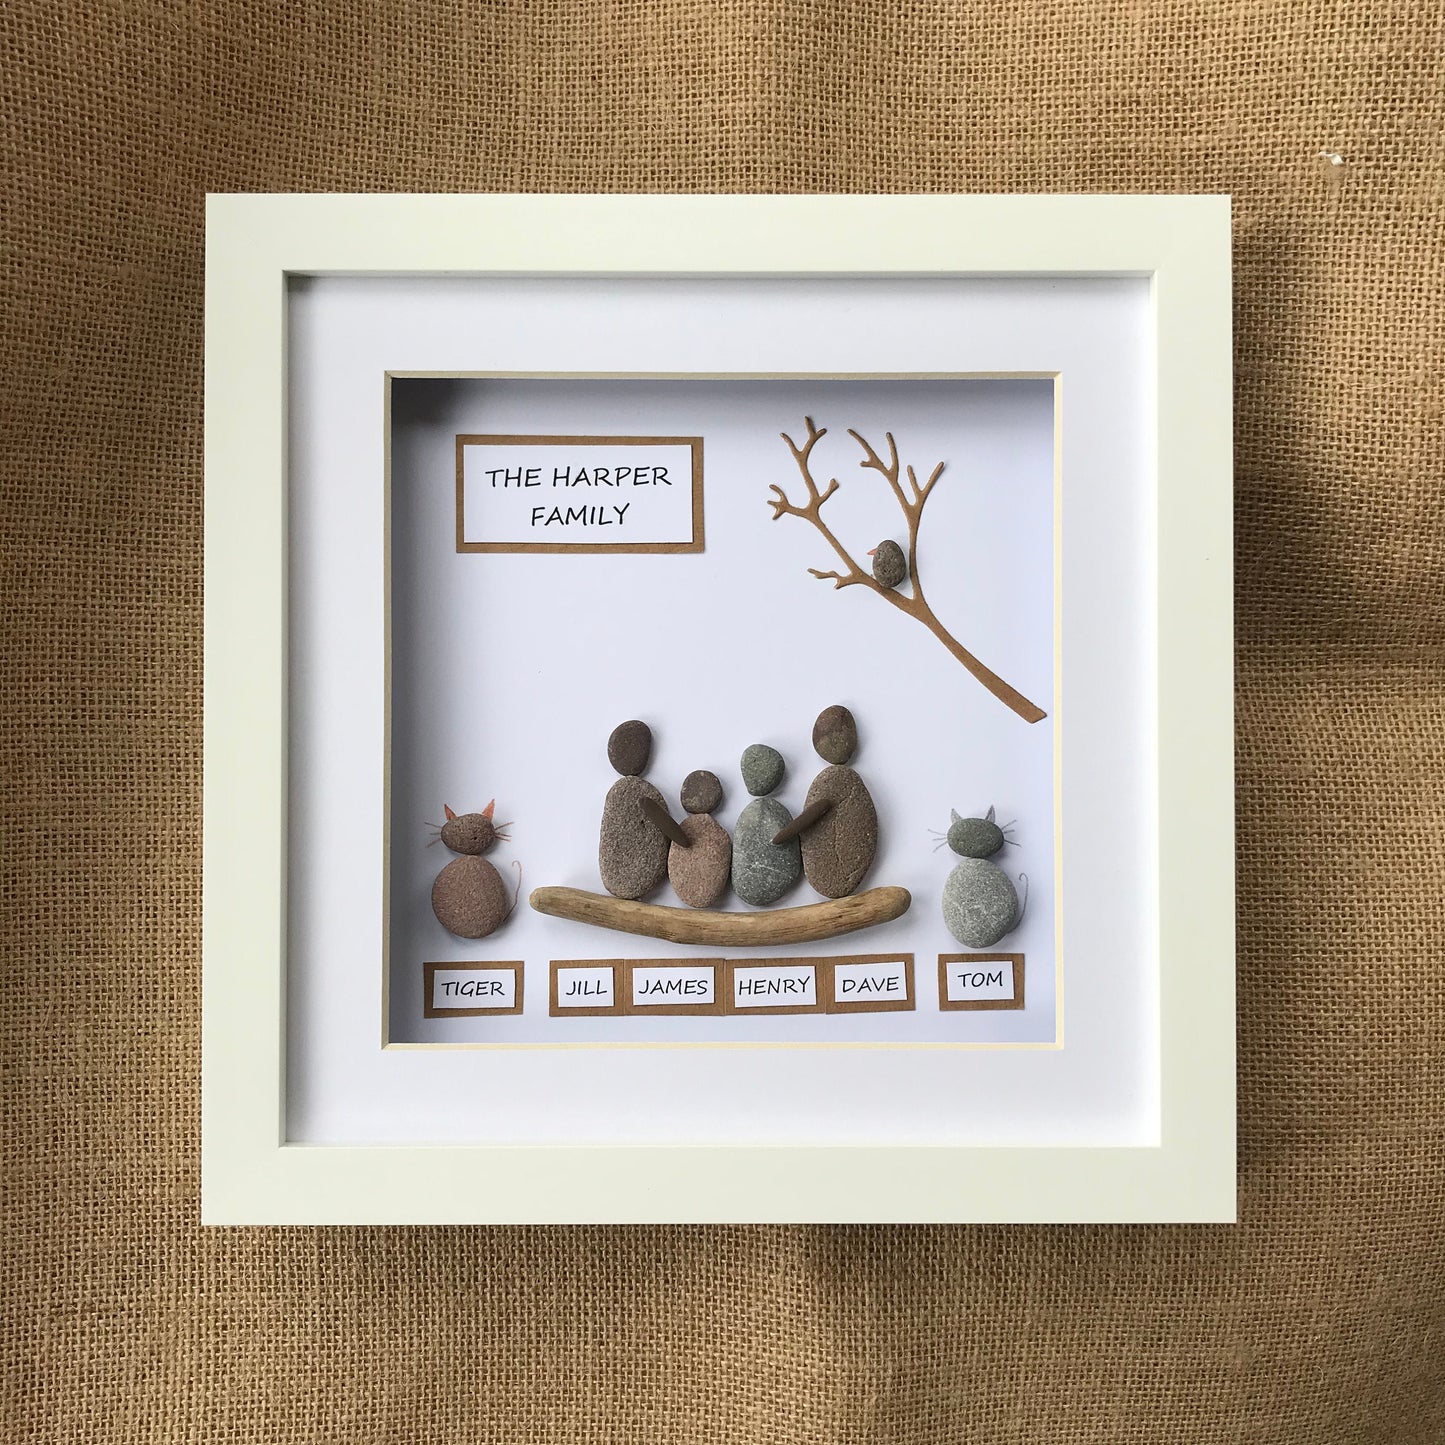 Handmade Family Personalised Pebble Art Picture